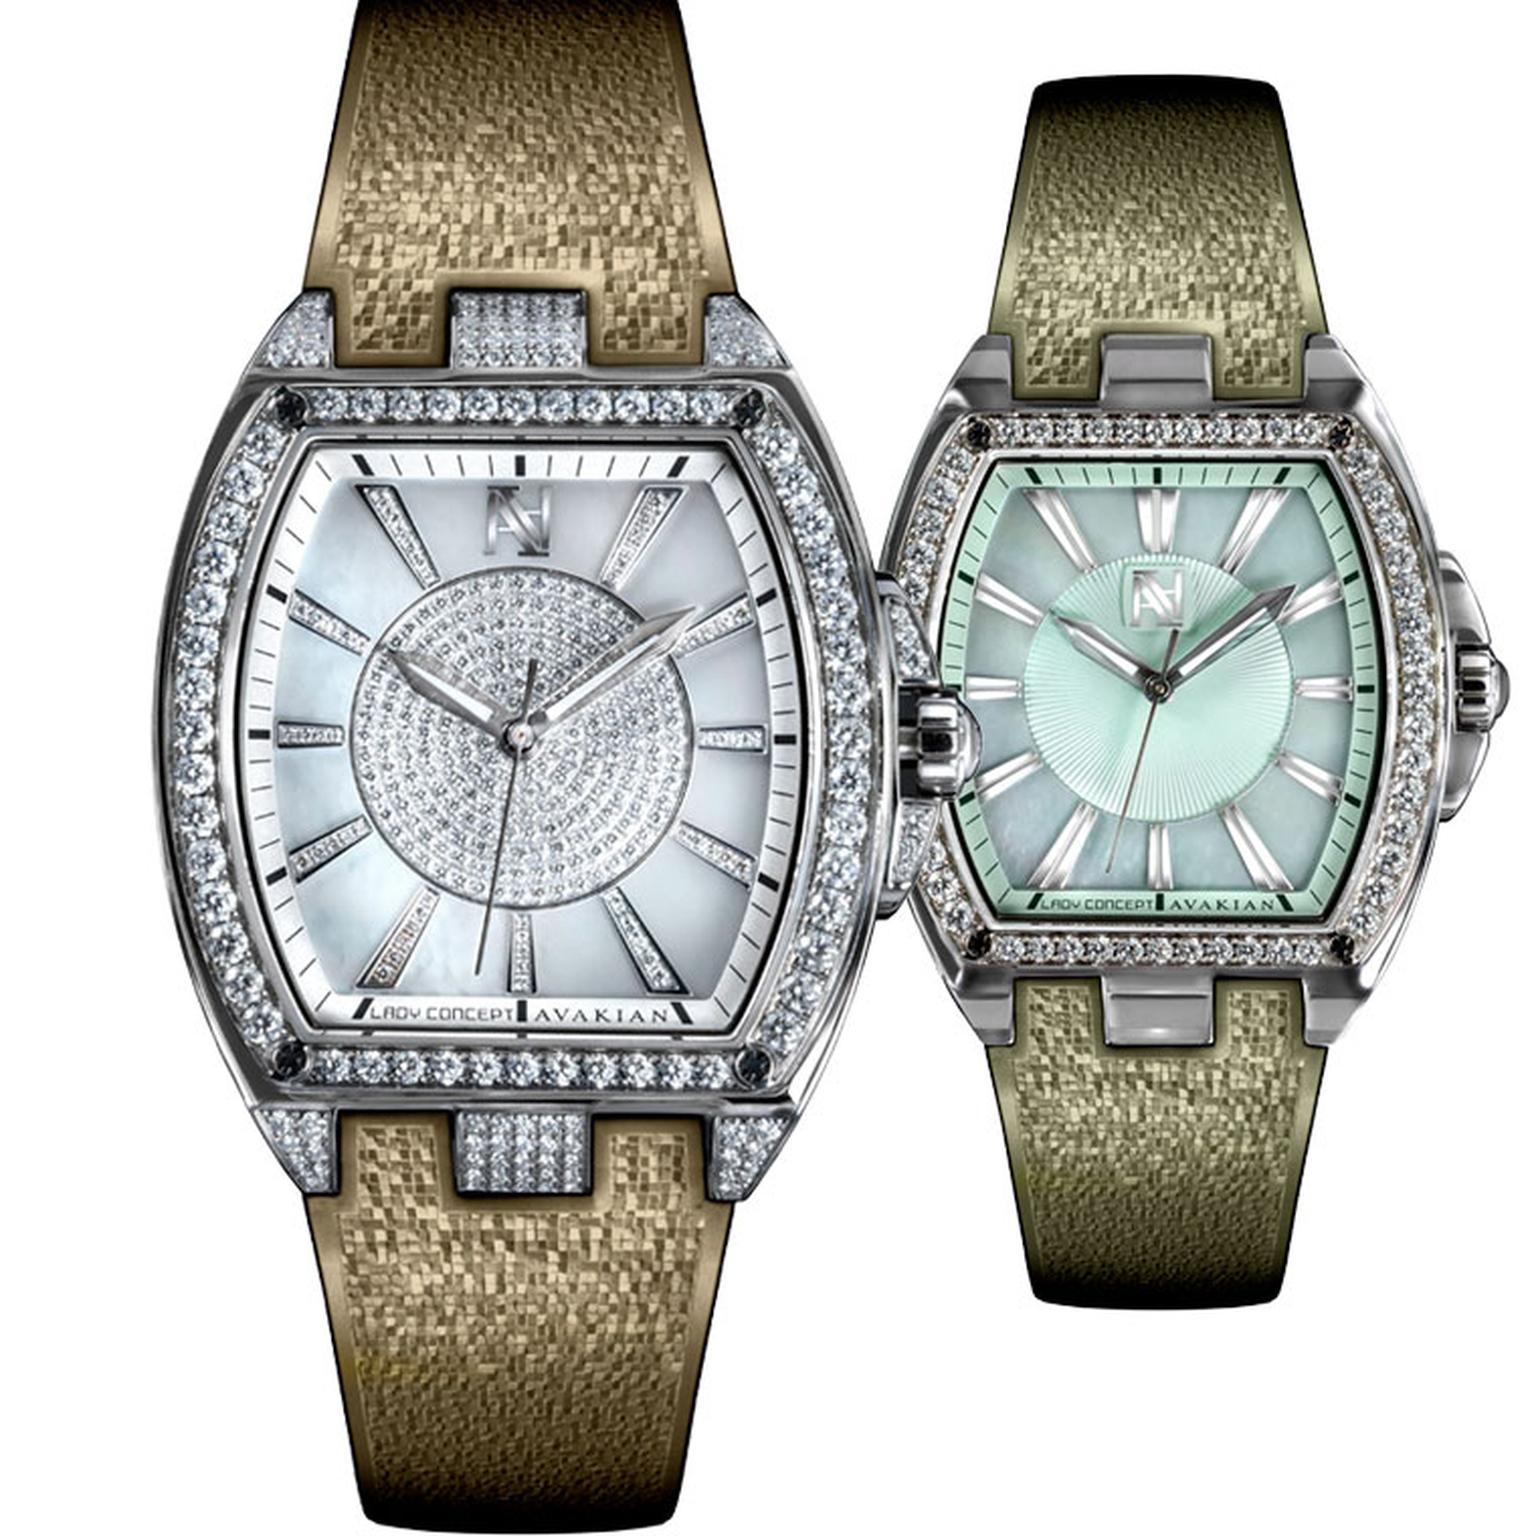 Avakian Lady Concept watches with interchangeable straps